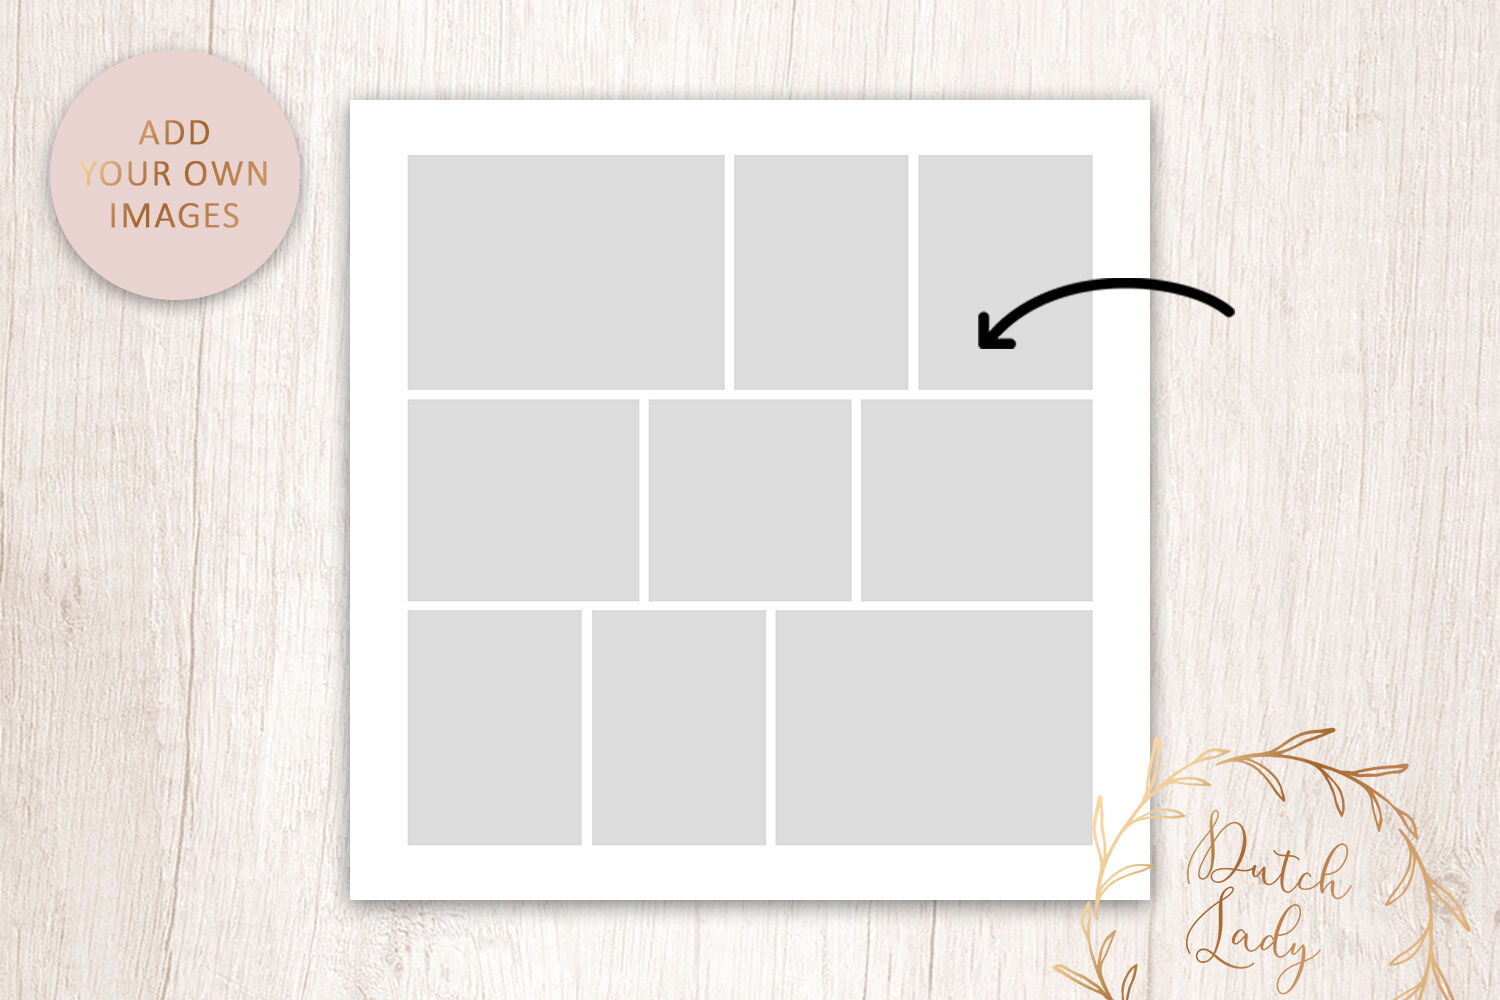 PSD Photo Collage Template #9 By The Dutch Lady Designs | TheHungryJPEG